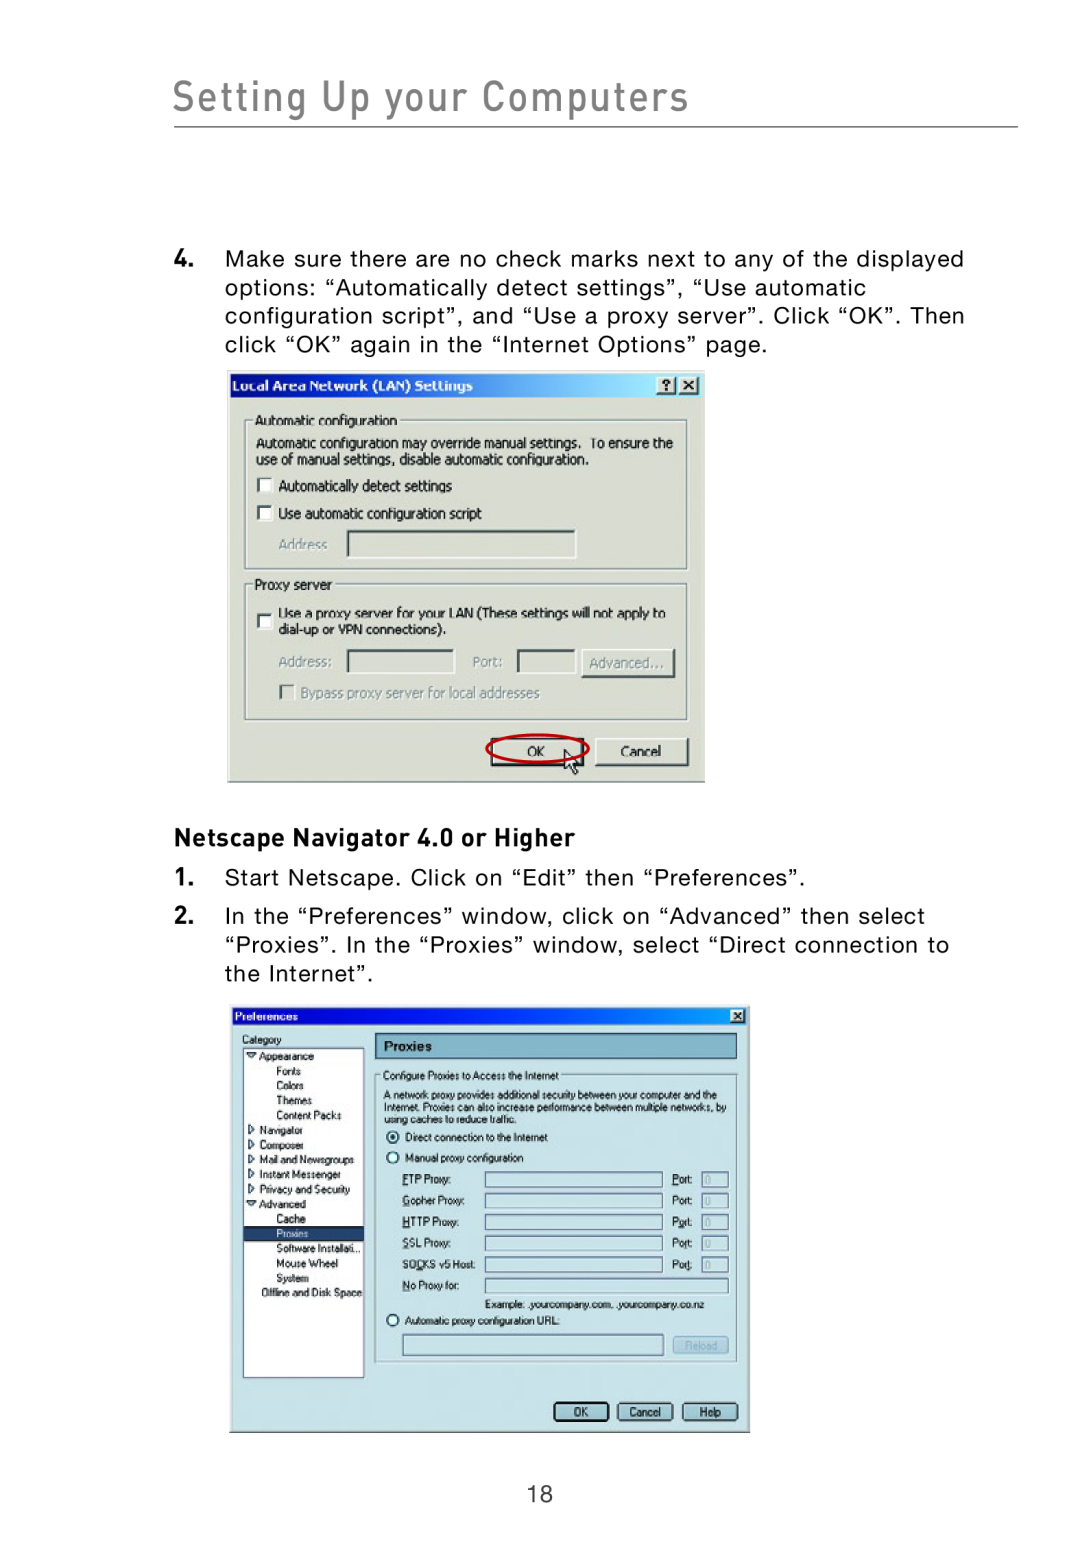 Belkin Pre-N manual Netscape Navigator 4.0 or Higher, Setting Up your Computers 